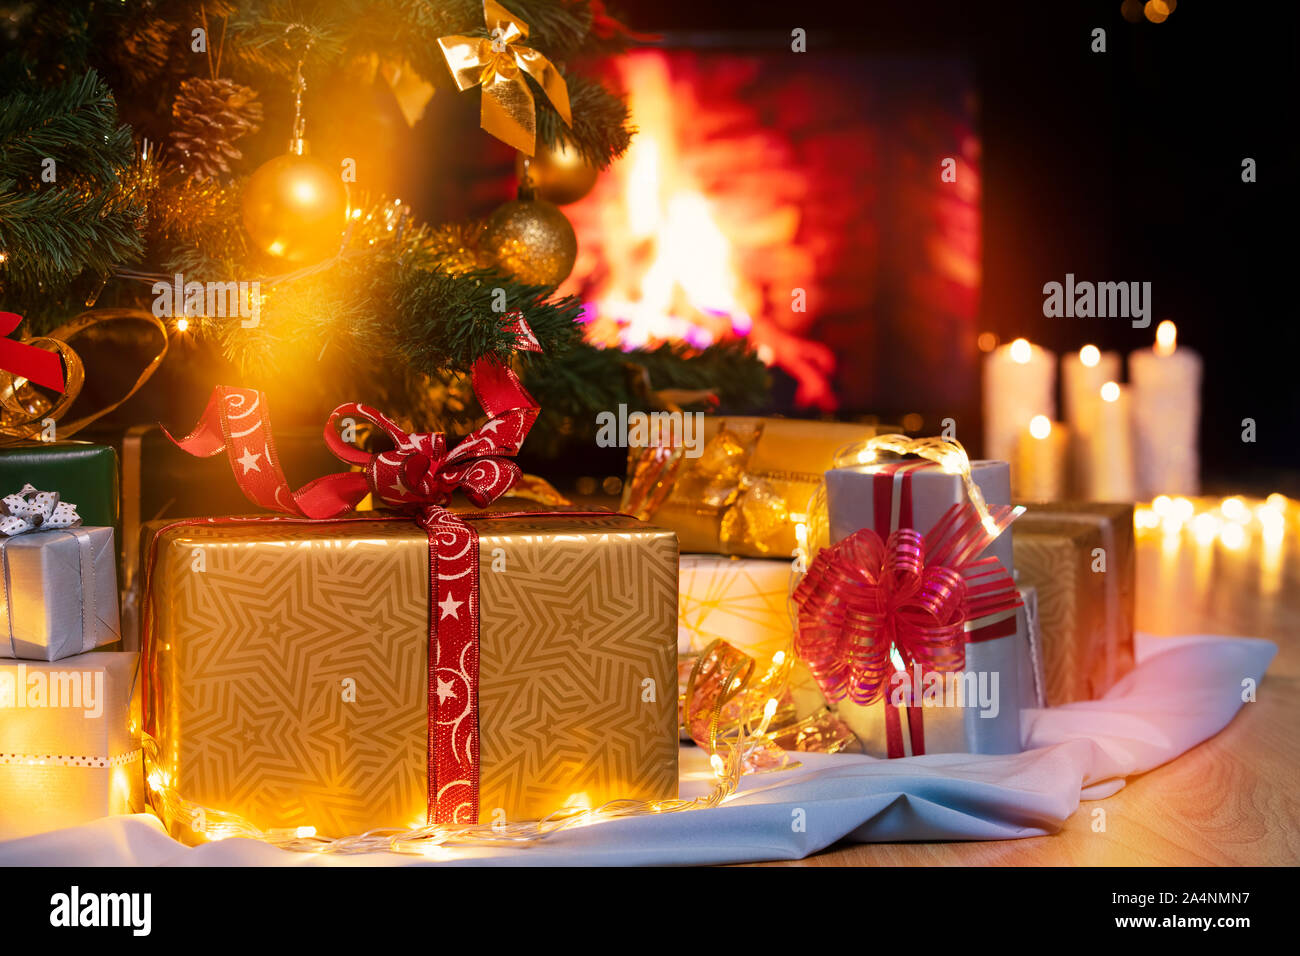 Stack of packed gift boxes under Christmas tree against burning fireplace. Lots of Christmas gifts under the tree. Candles on wooden floor. Focus on g Stock Photo